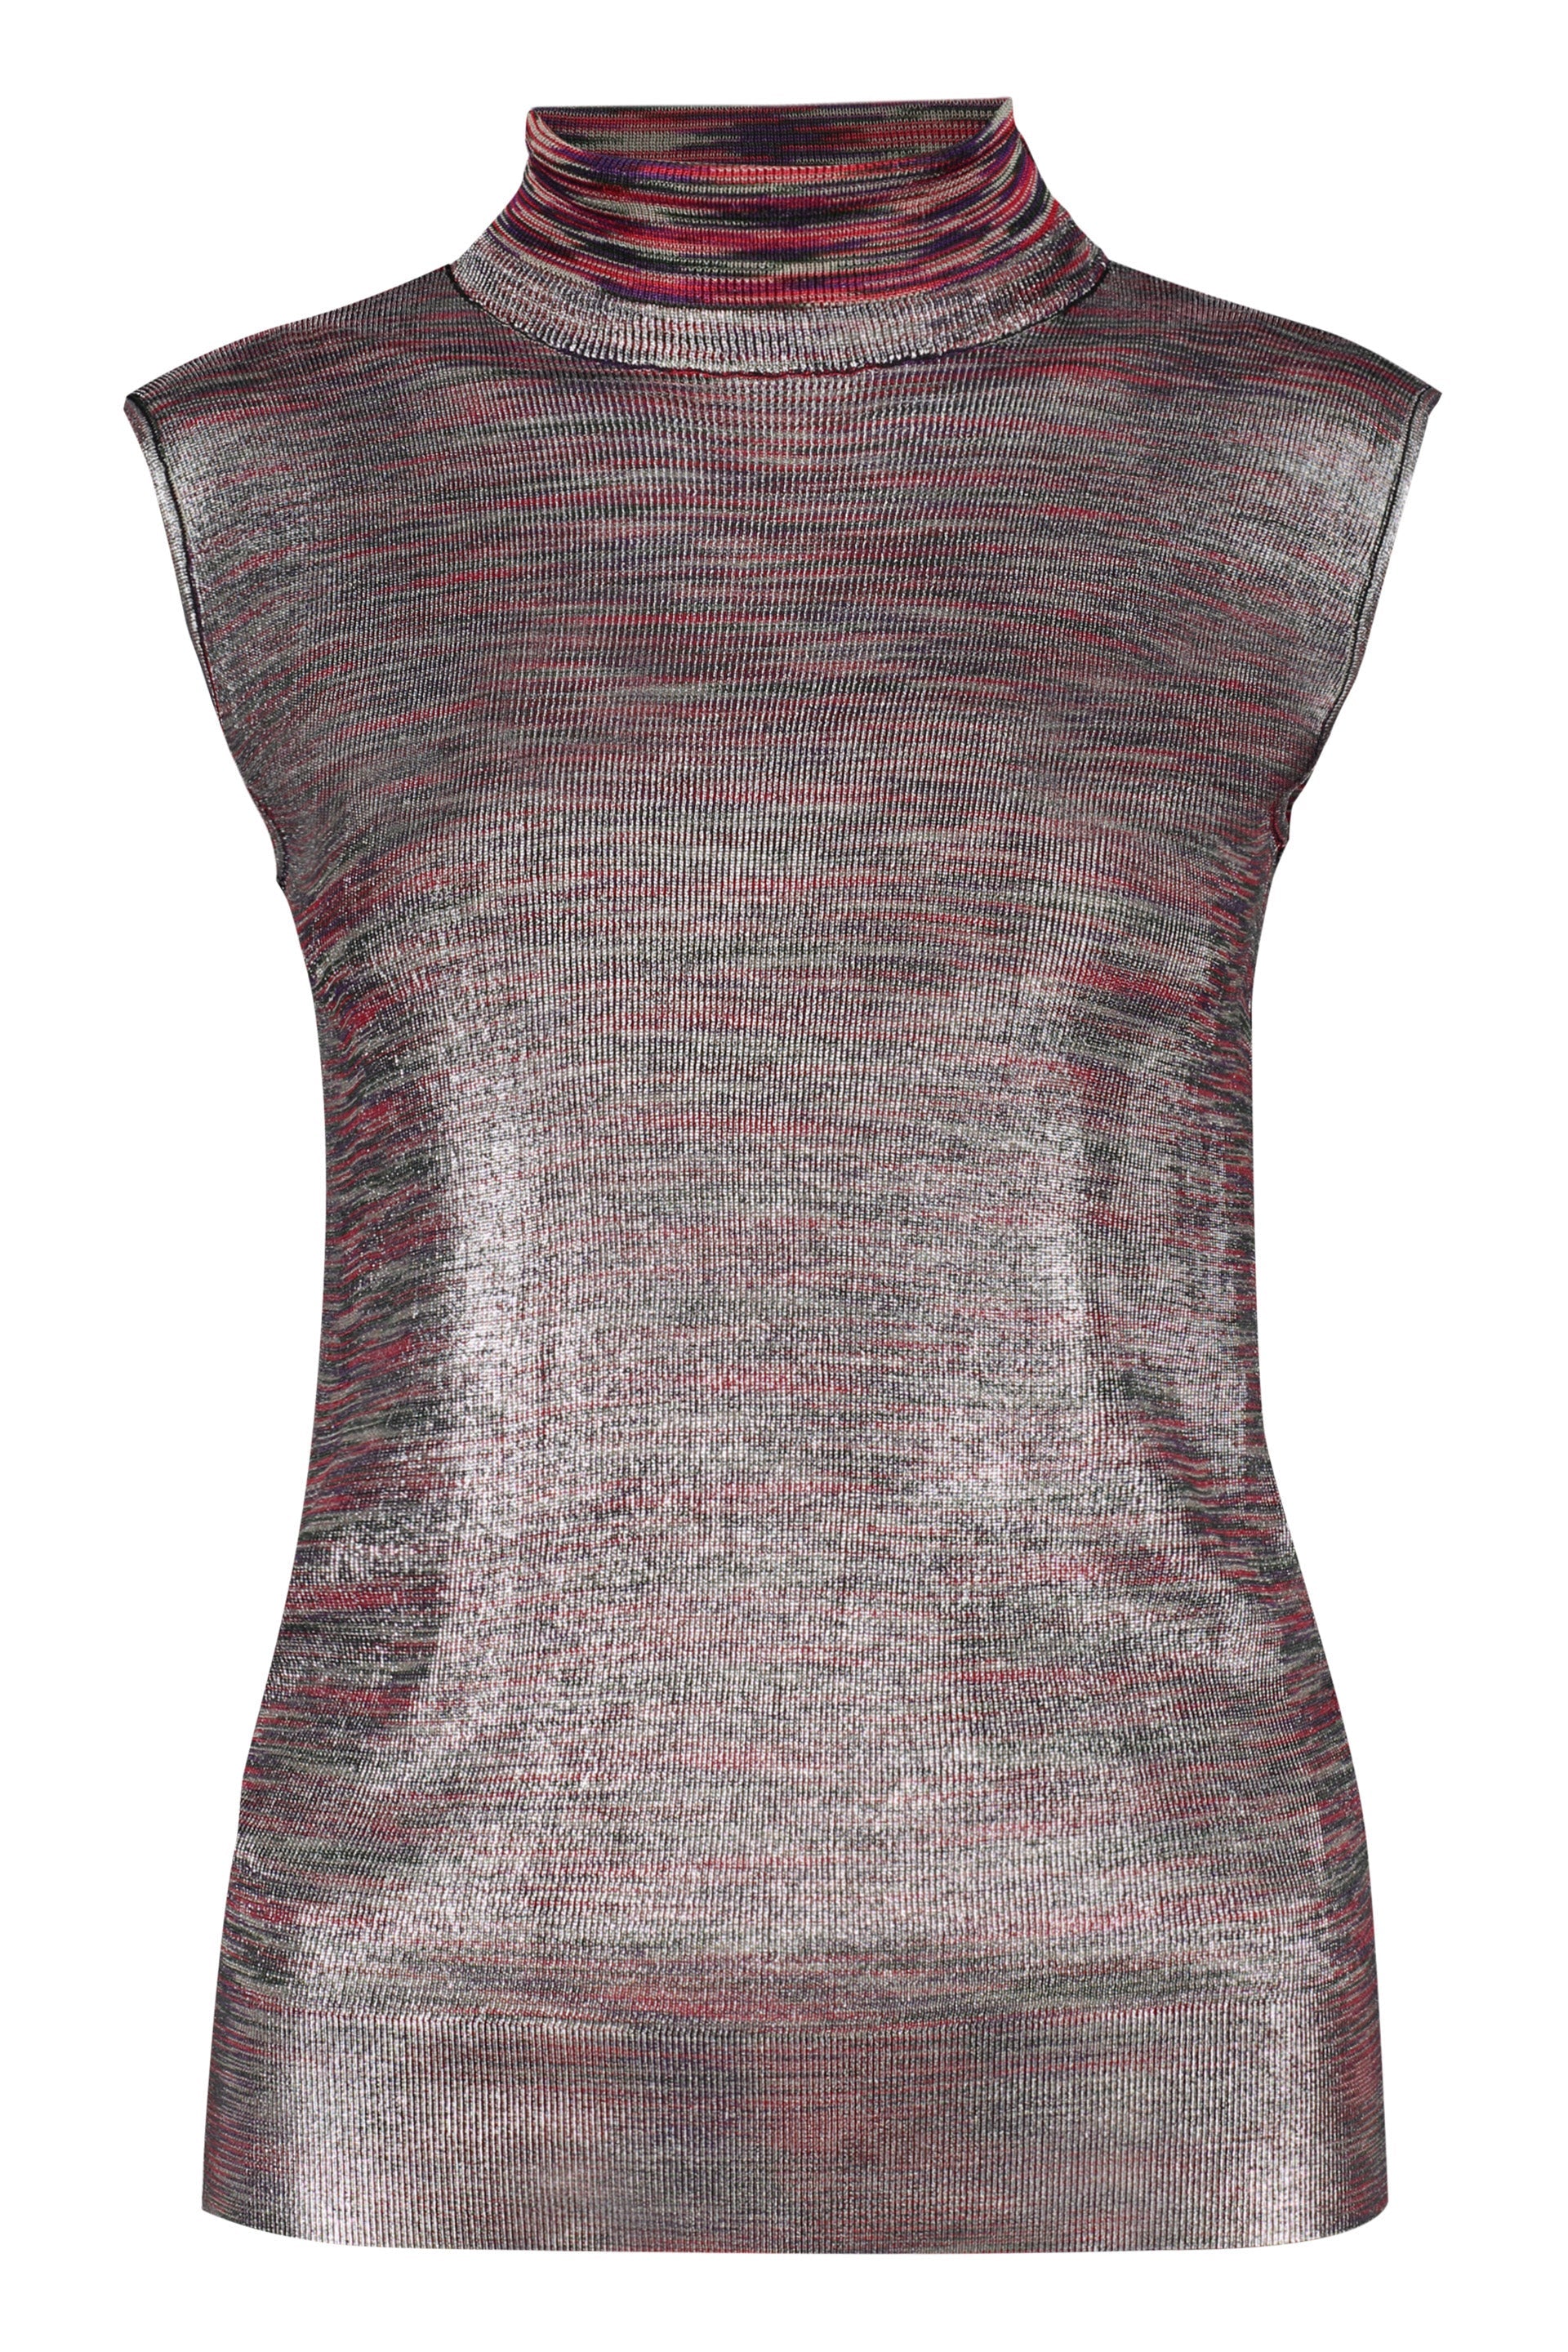 Missoni-OUTLET-SALE-Sleeveless-top-Shirts-42-ARCHIVE-COLLECTION.jpg